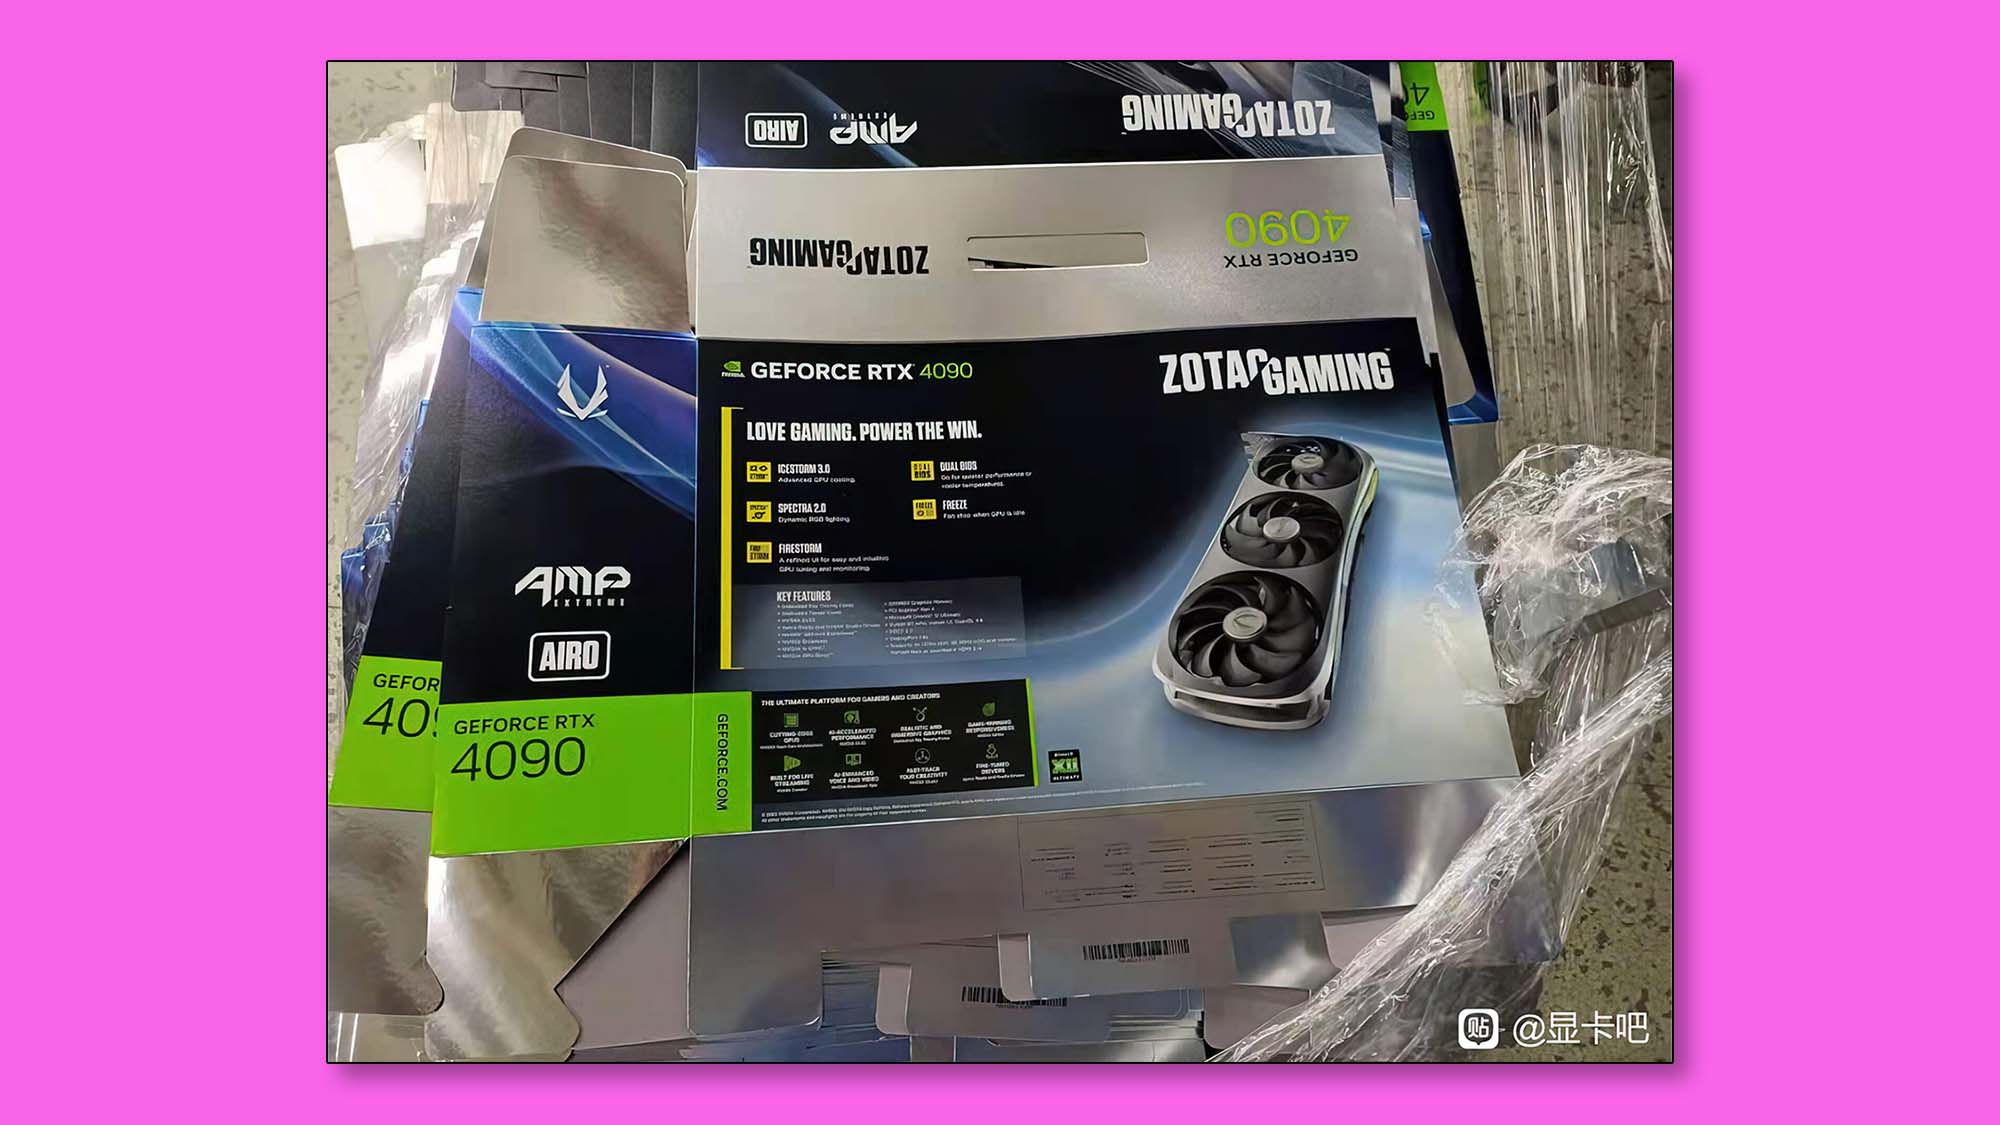 The purported packaging of the Zotac RTX 4090 AMP Extreme